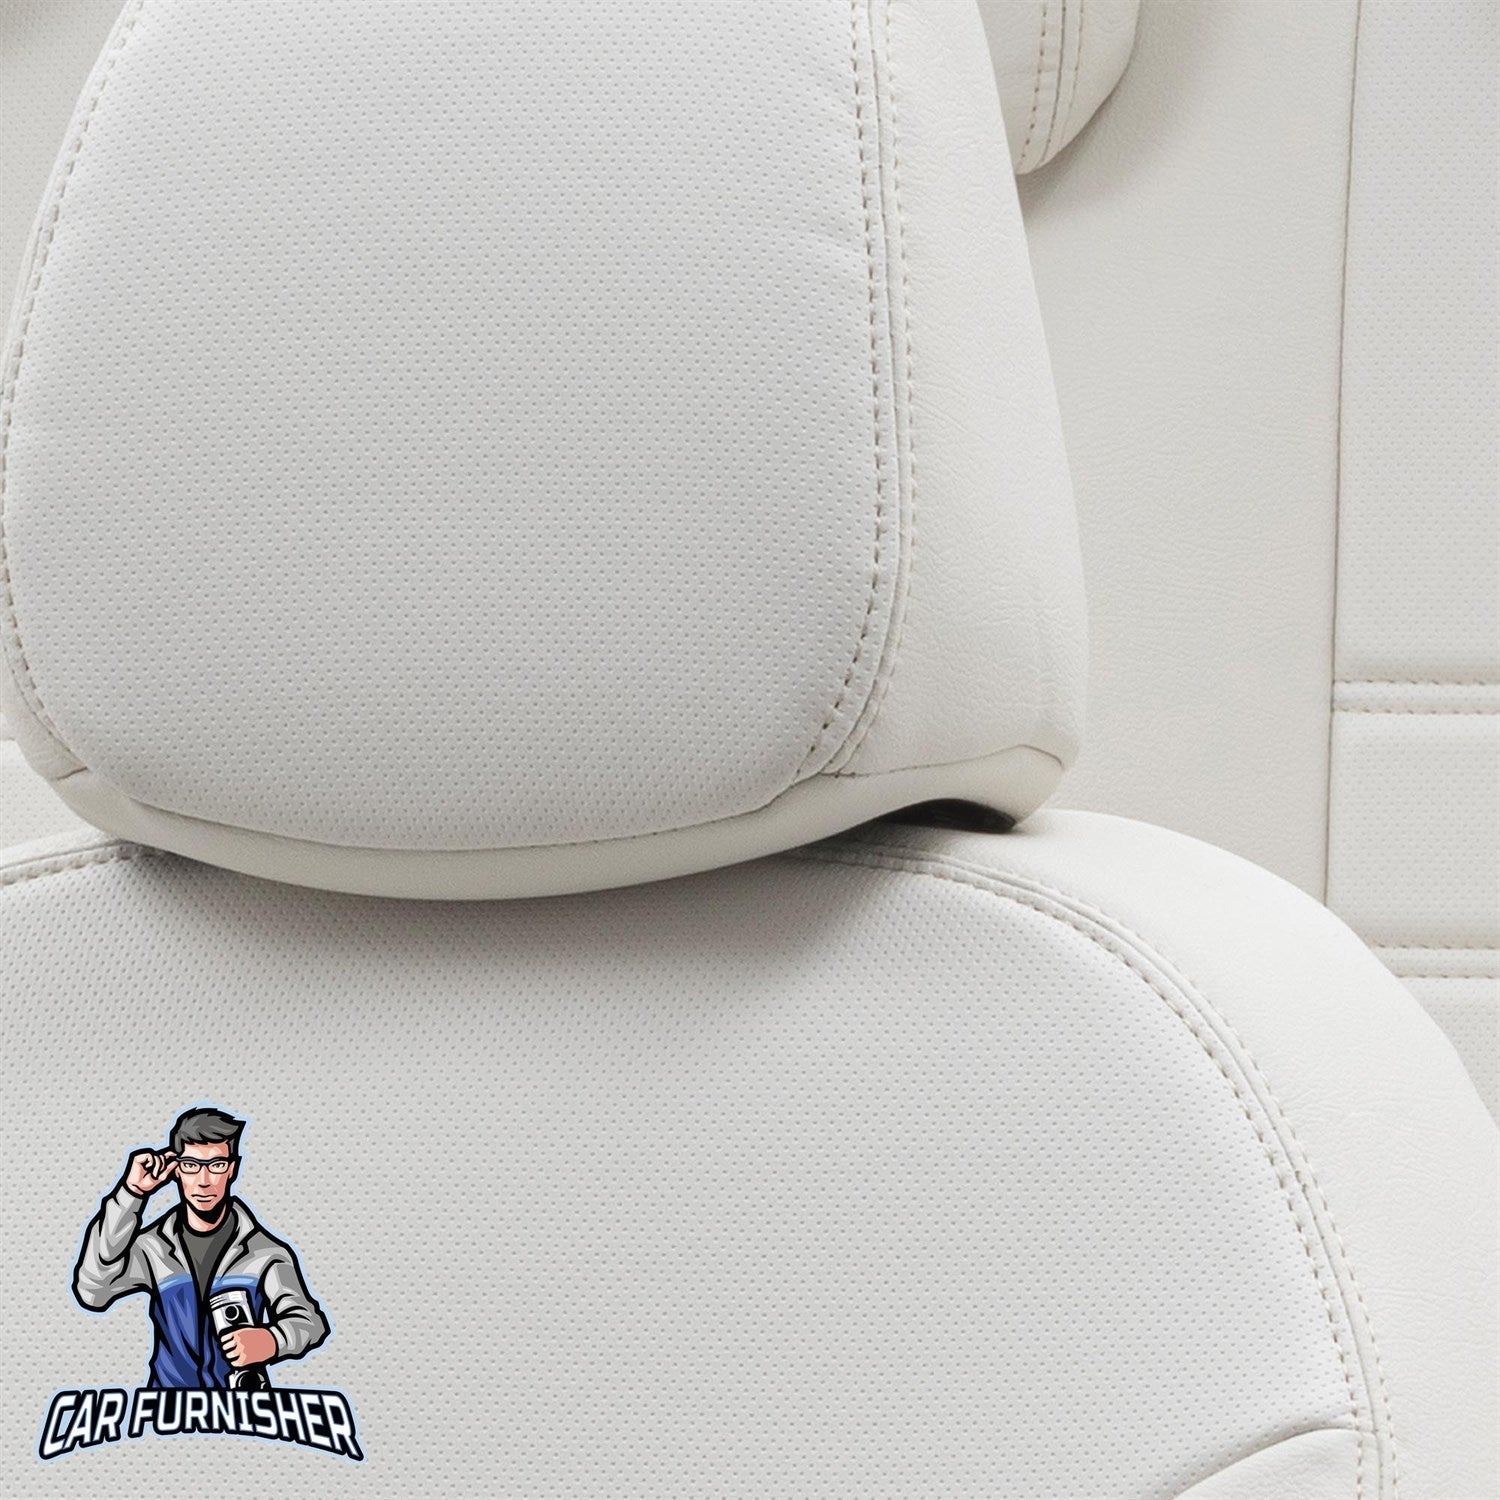 Honda CRV Seat Covers Istanbul Leather Design Ivory Leather